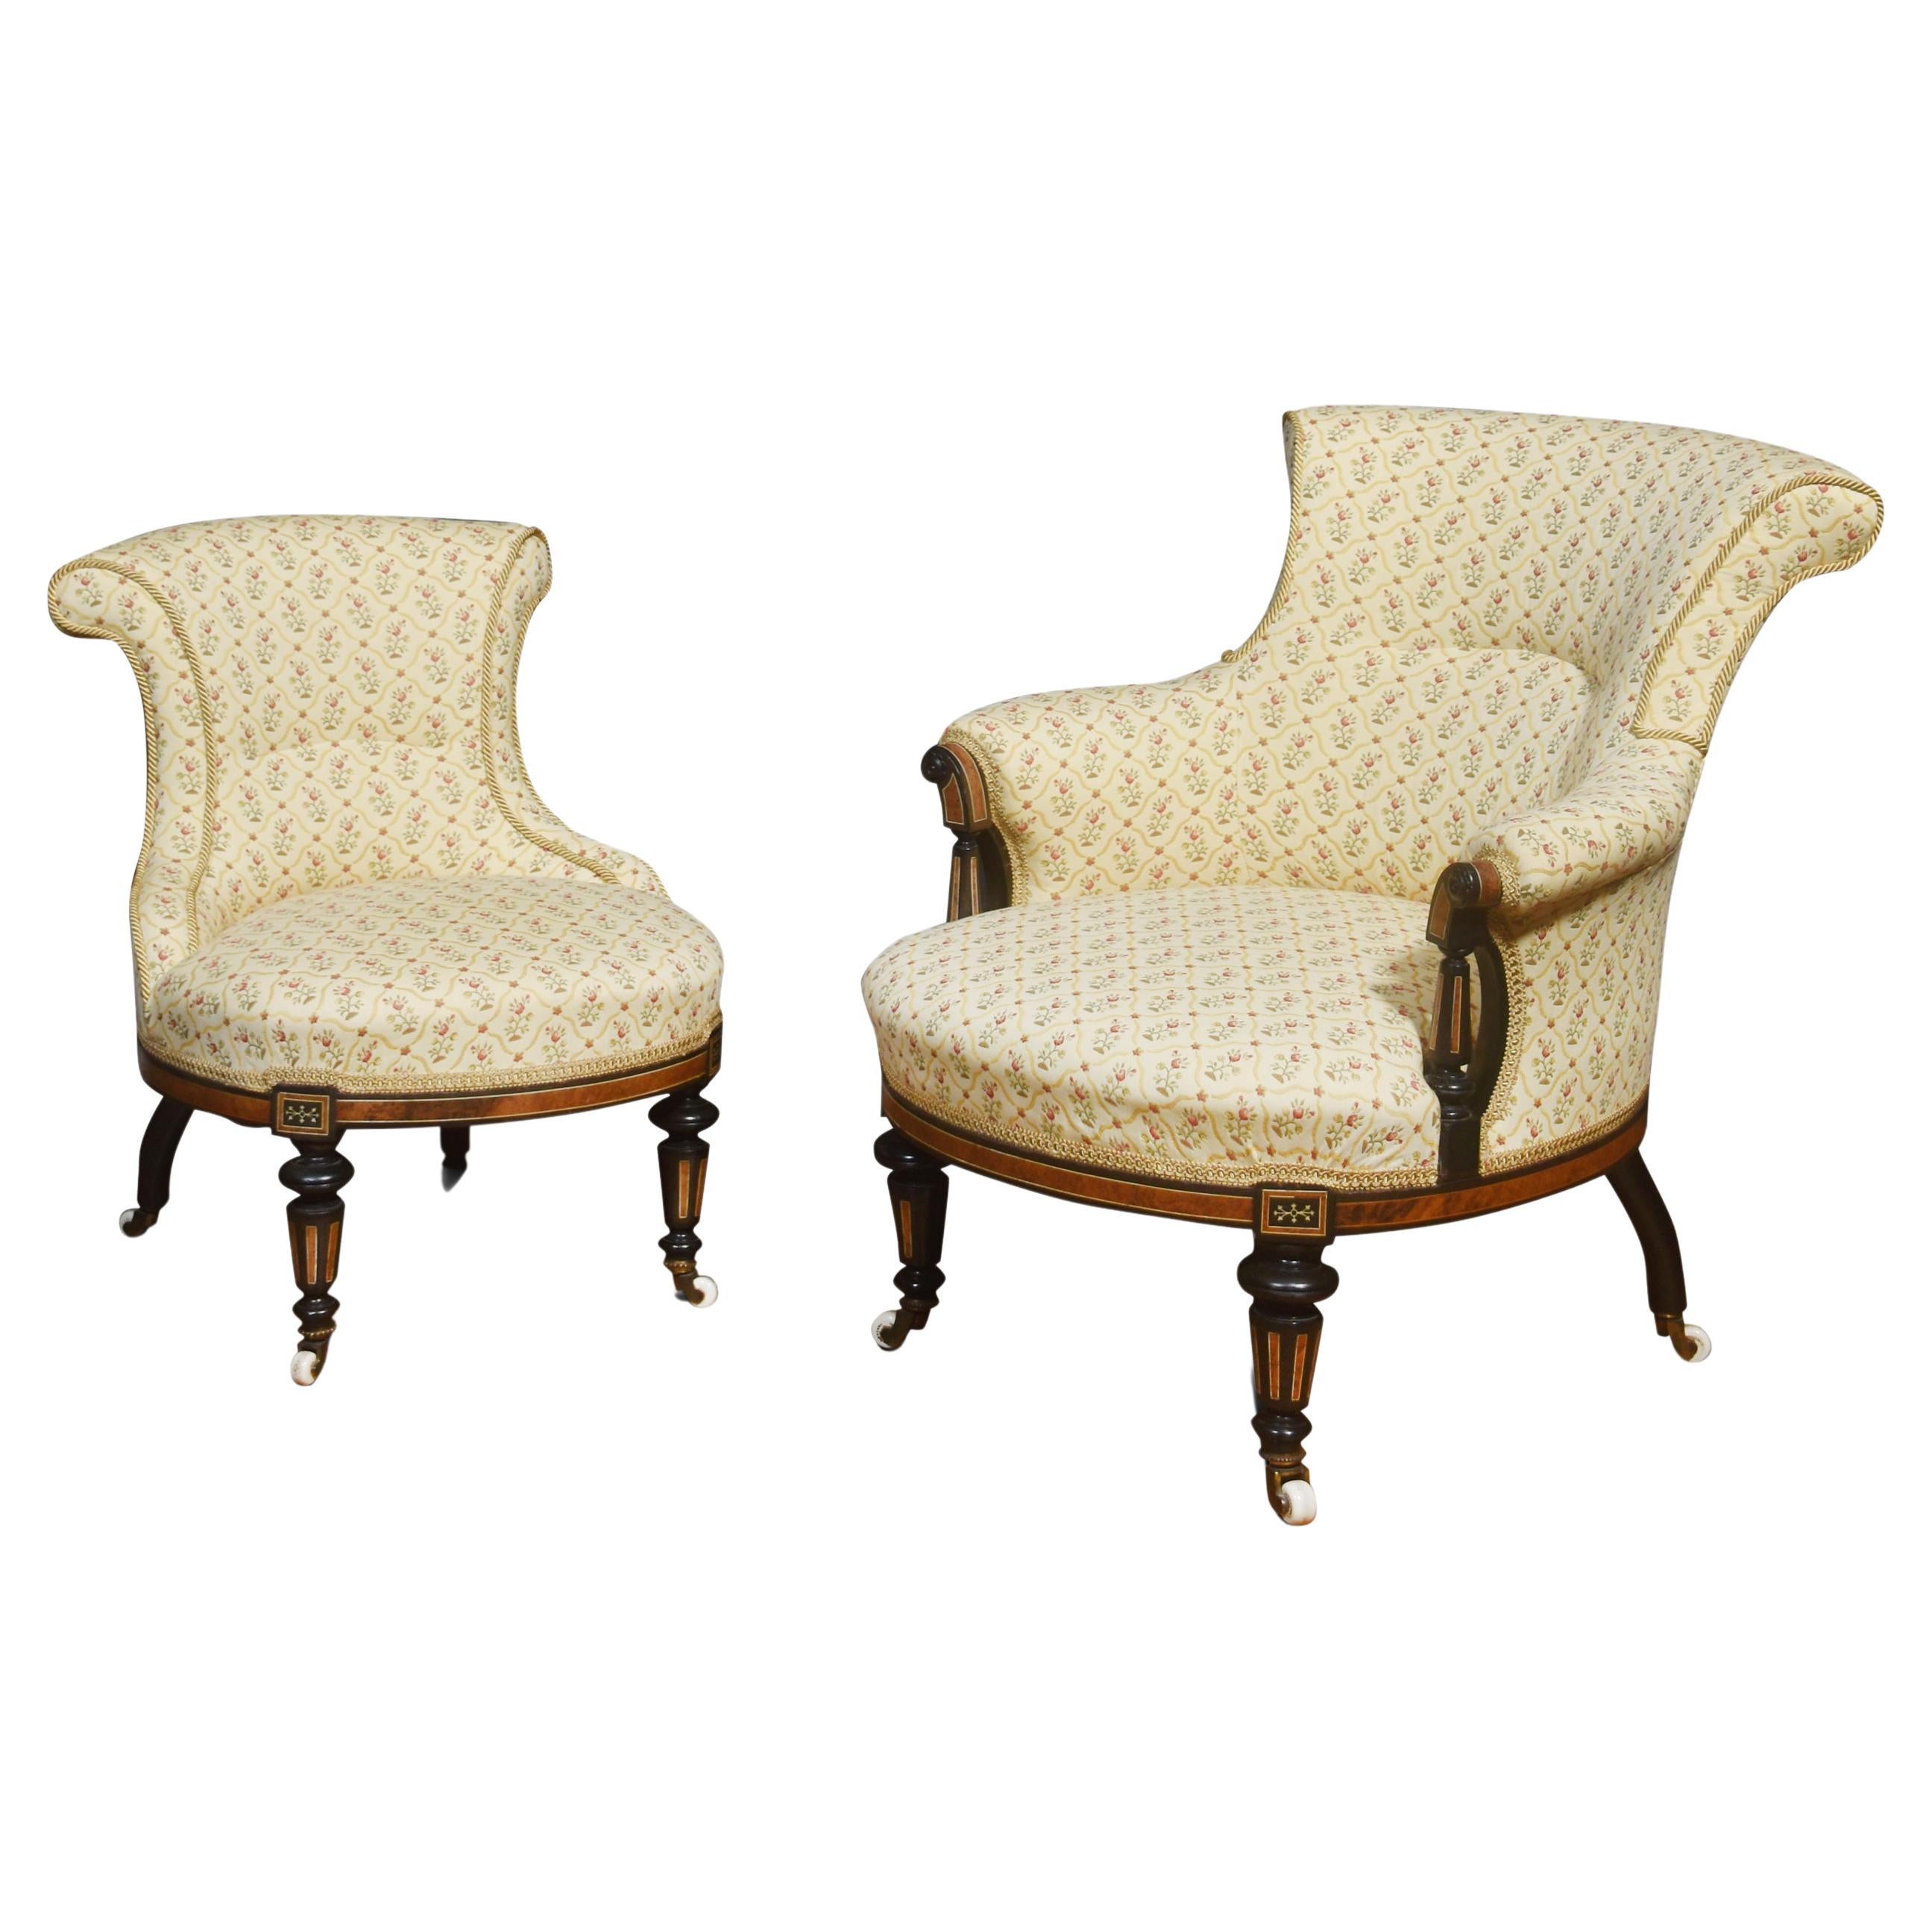 Set of two bedroom chairs